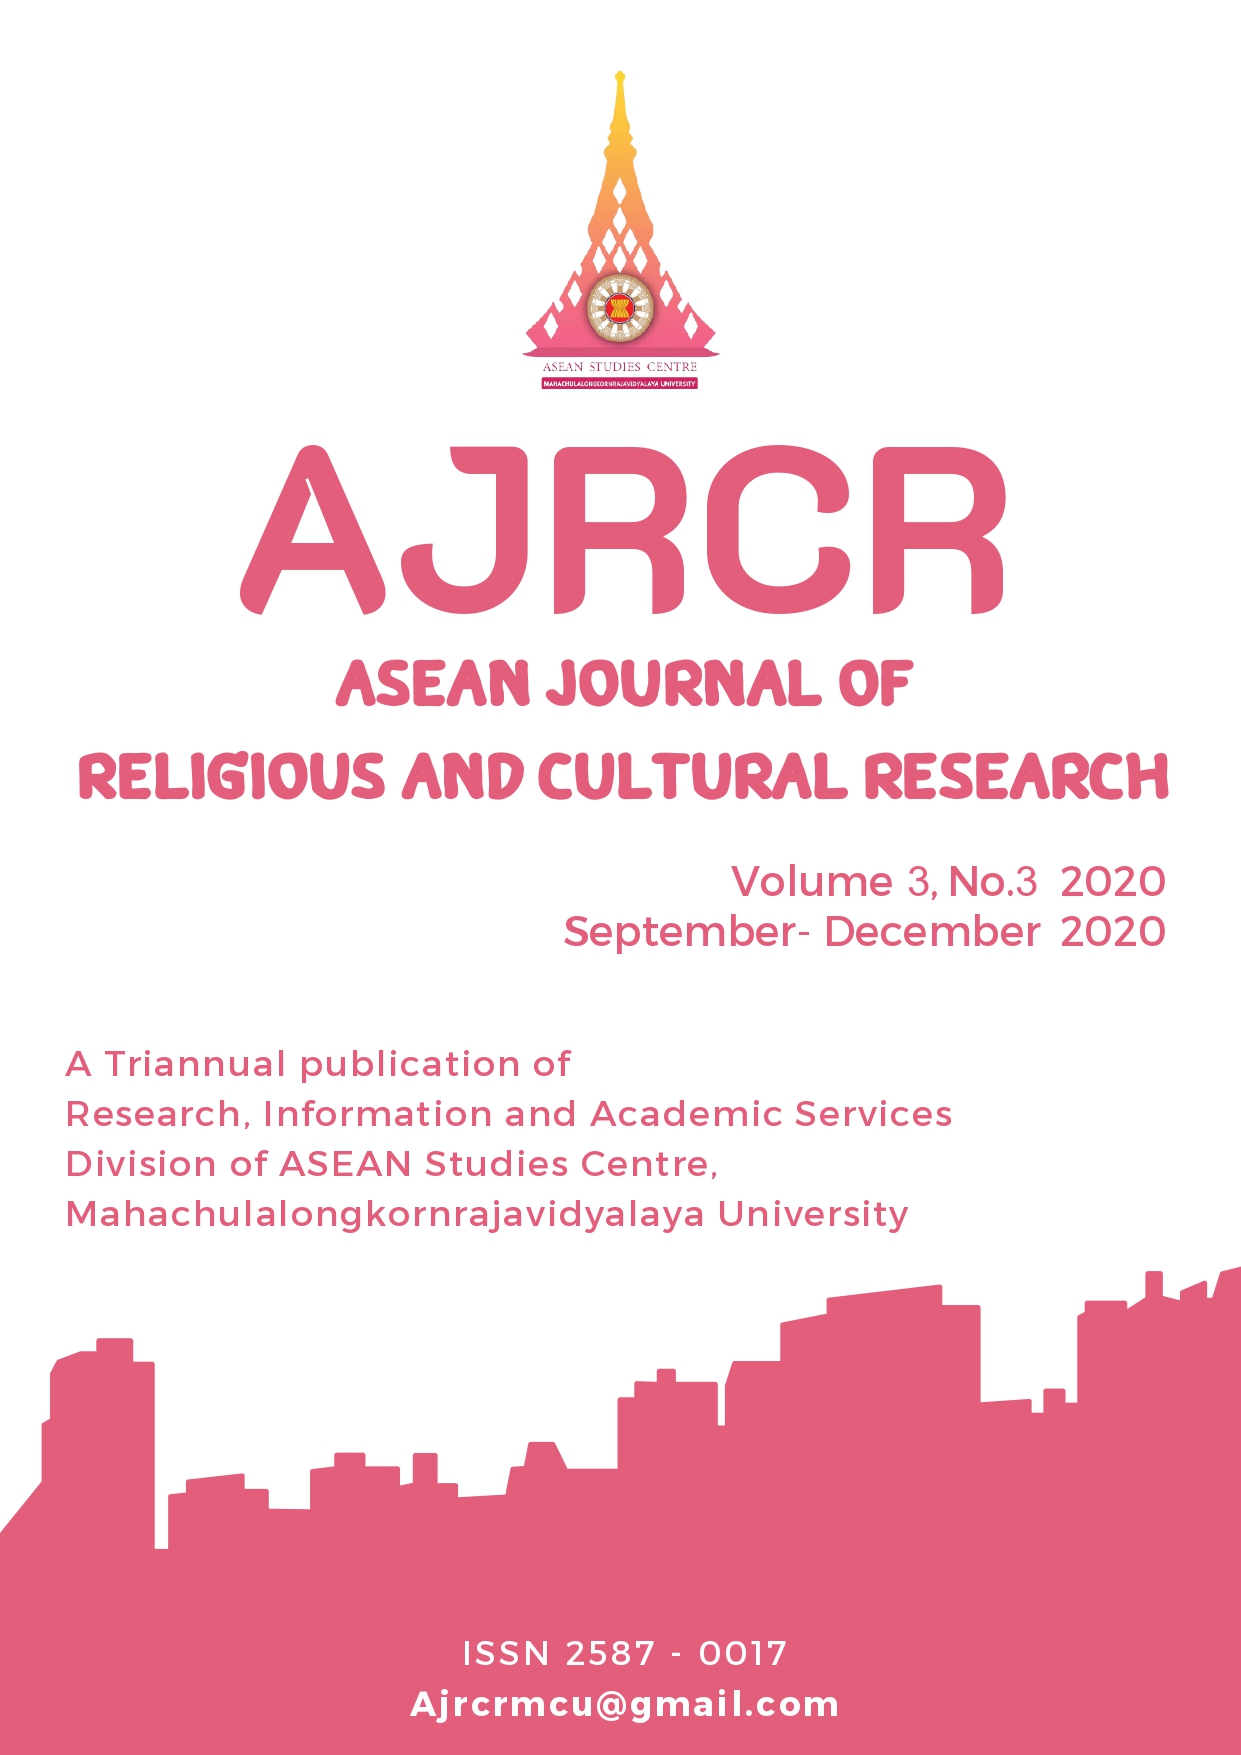 					View Vol. 3 No. 3 (2020): ASEAN Journal of Religious and Cultural Research (AJRCR)
				